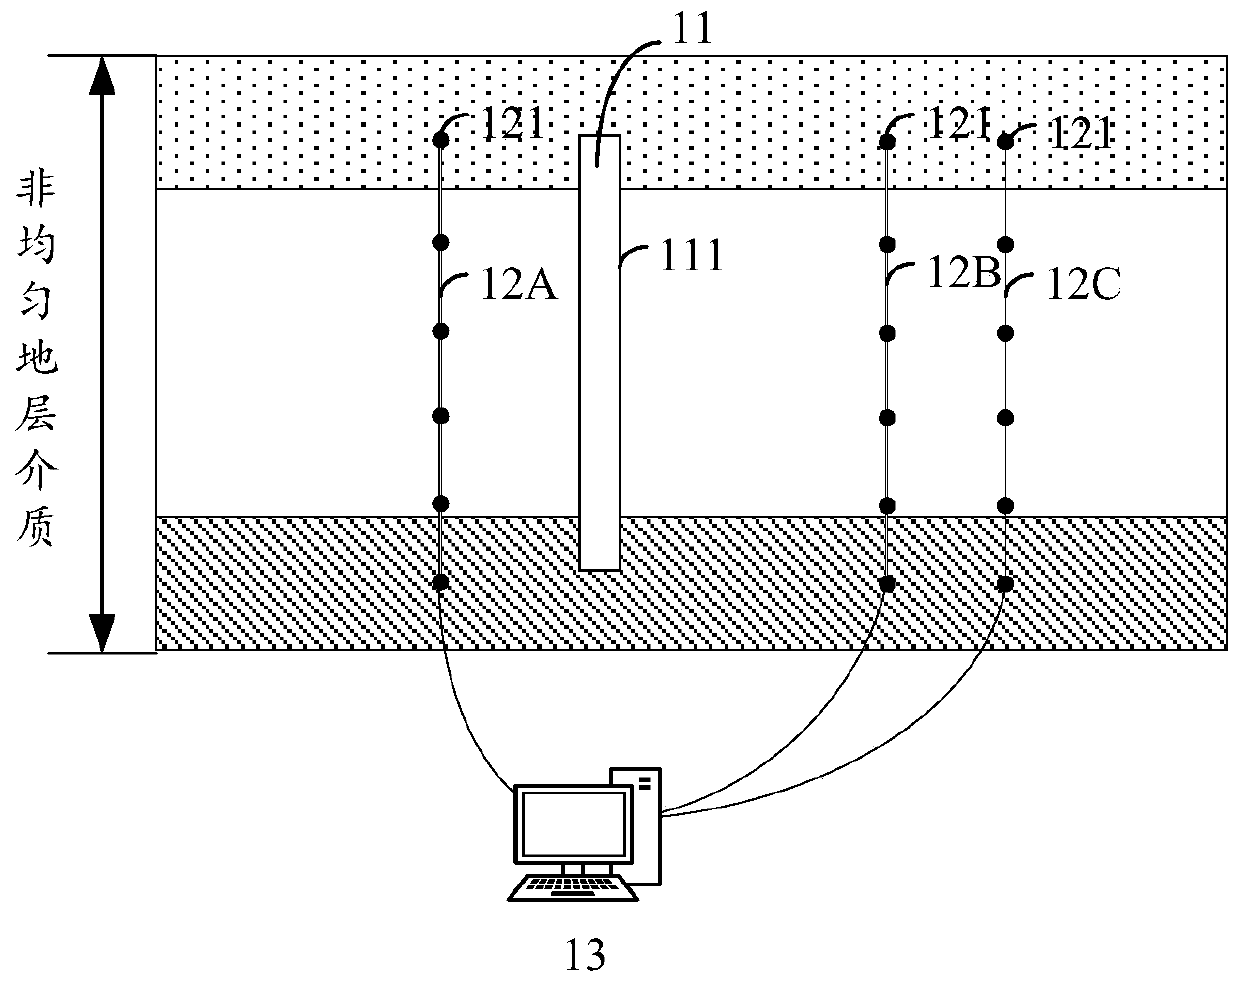 Inter-well electromagnetic detection system and method